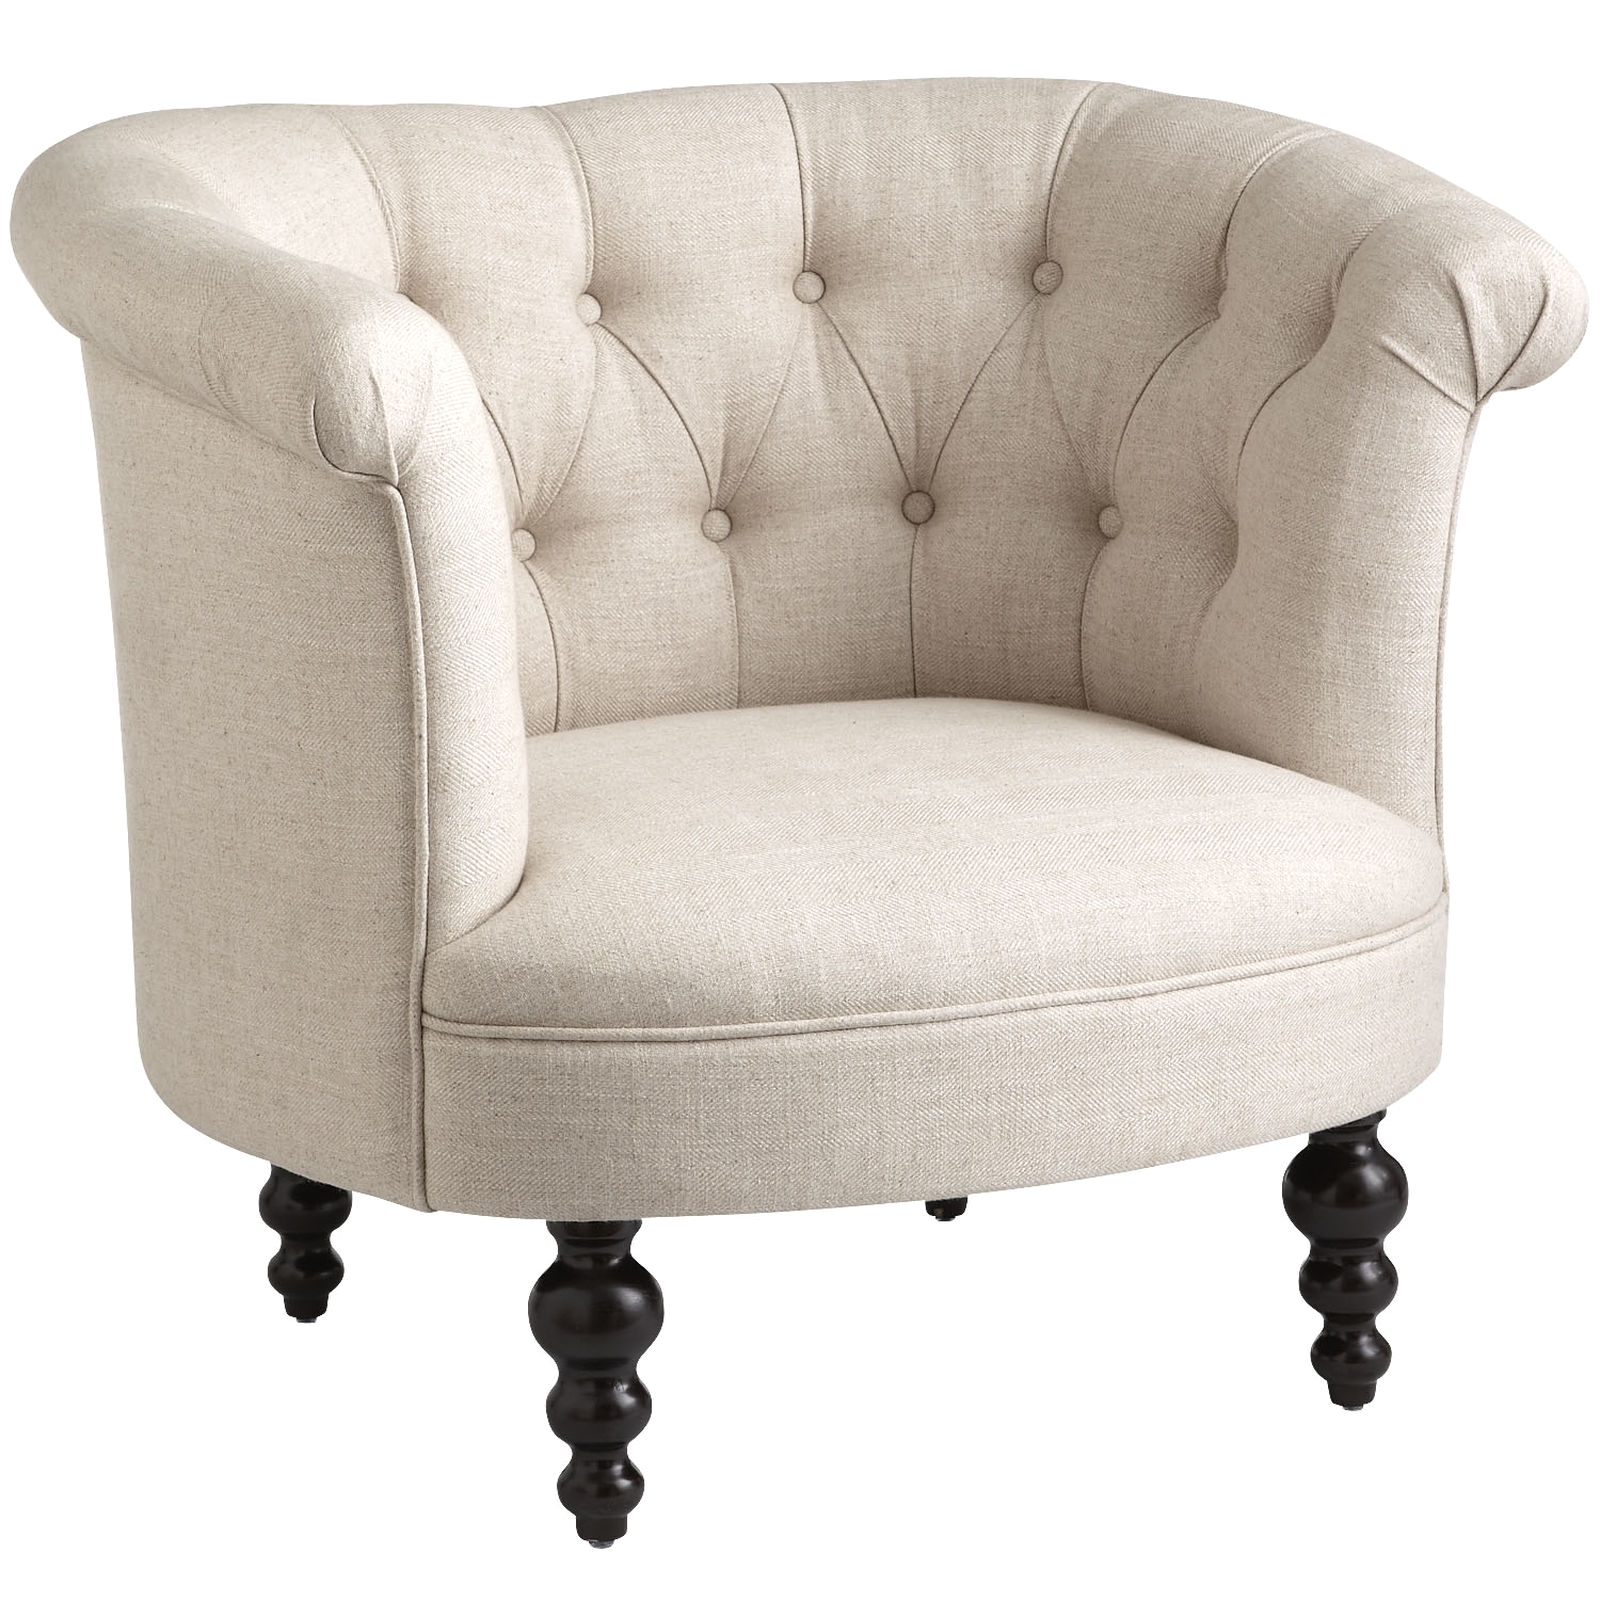 pier one armchair impressive colette flax beige 1 imports